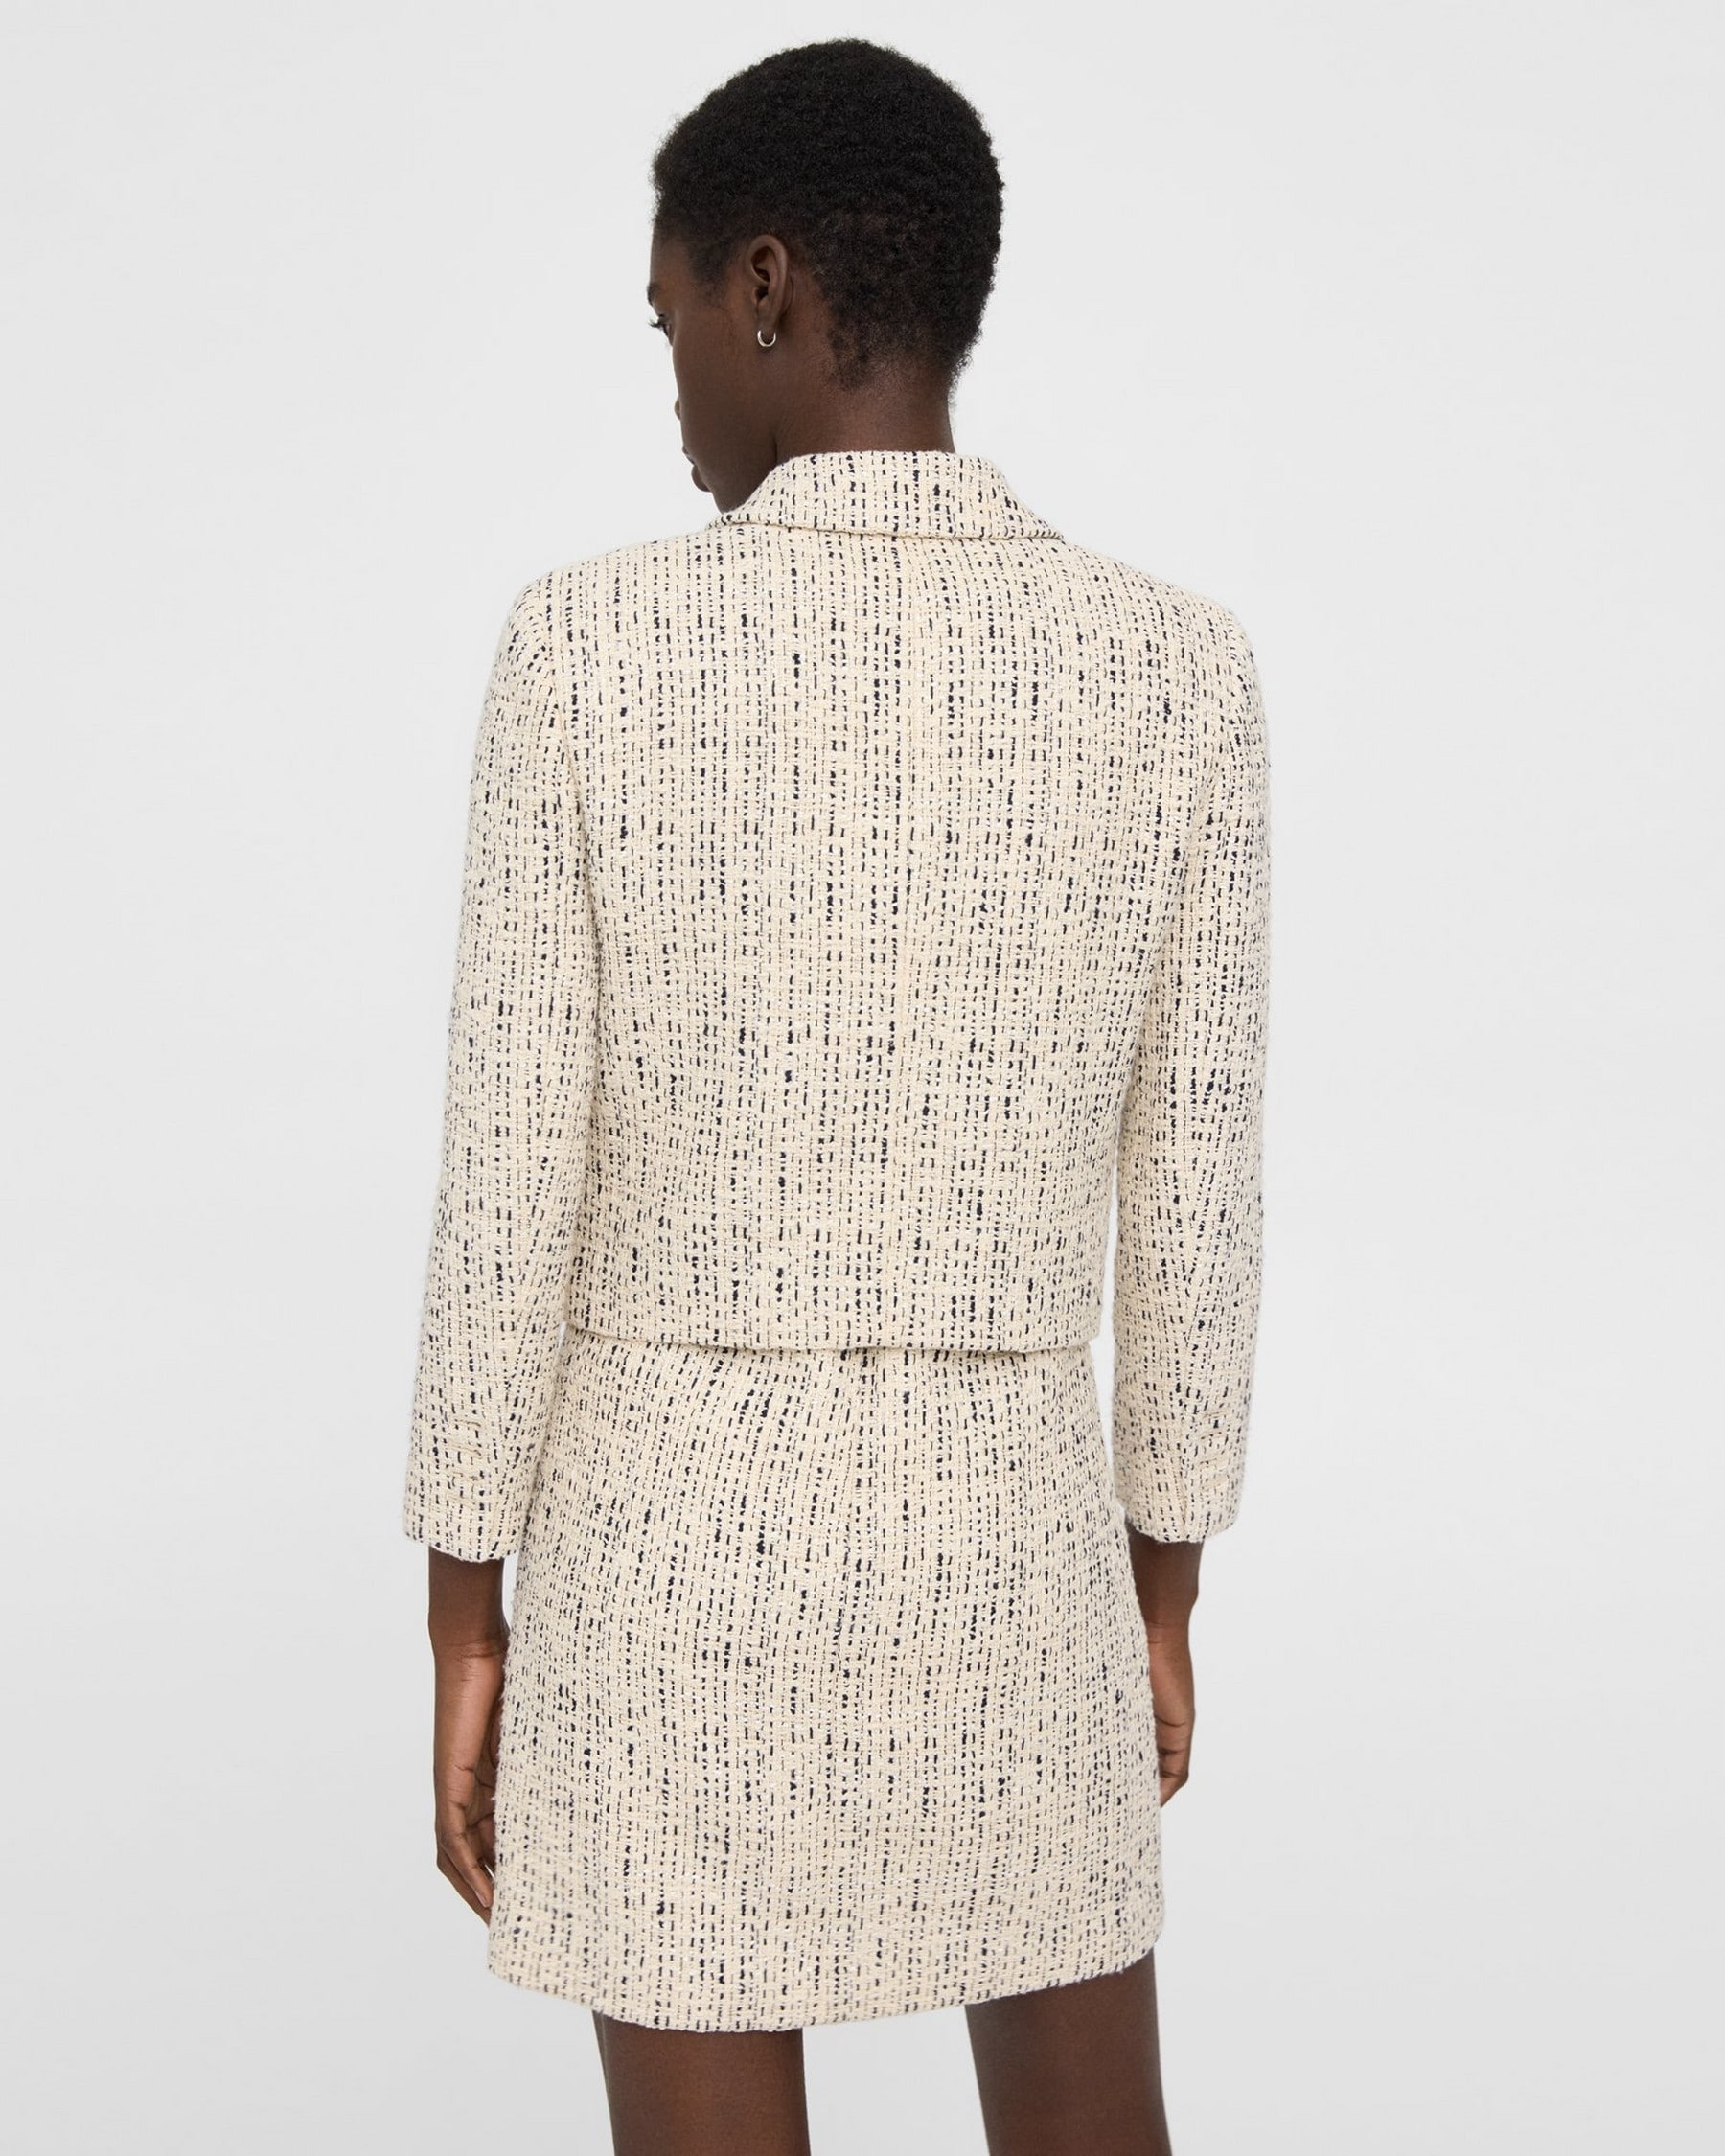 Cropped Jacket in Cotton-Blend Tweed